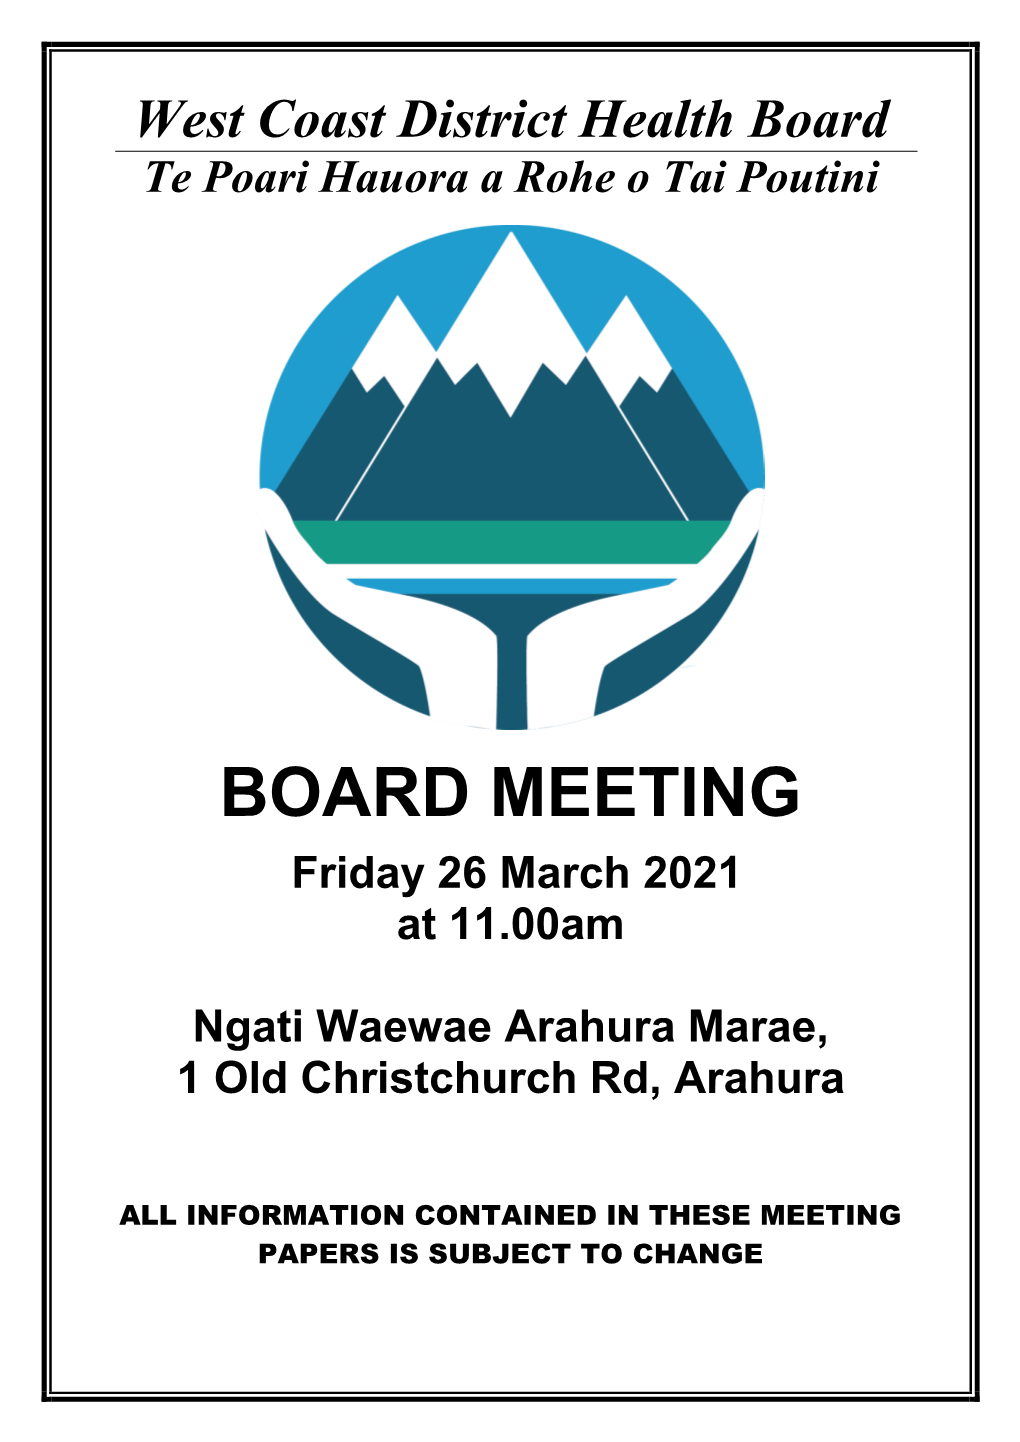 Board Papers for the West Coast DHB Board Meeting Friday, 26 March 2021